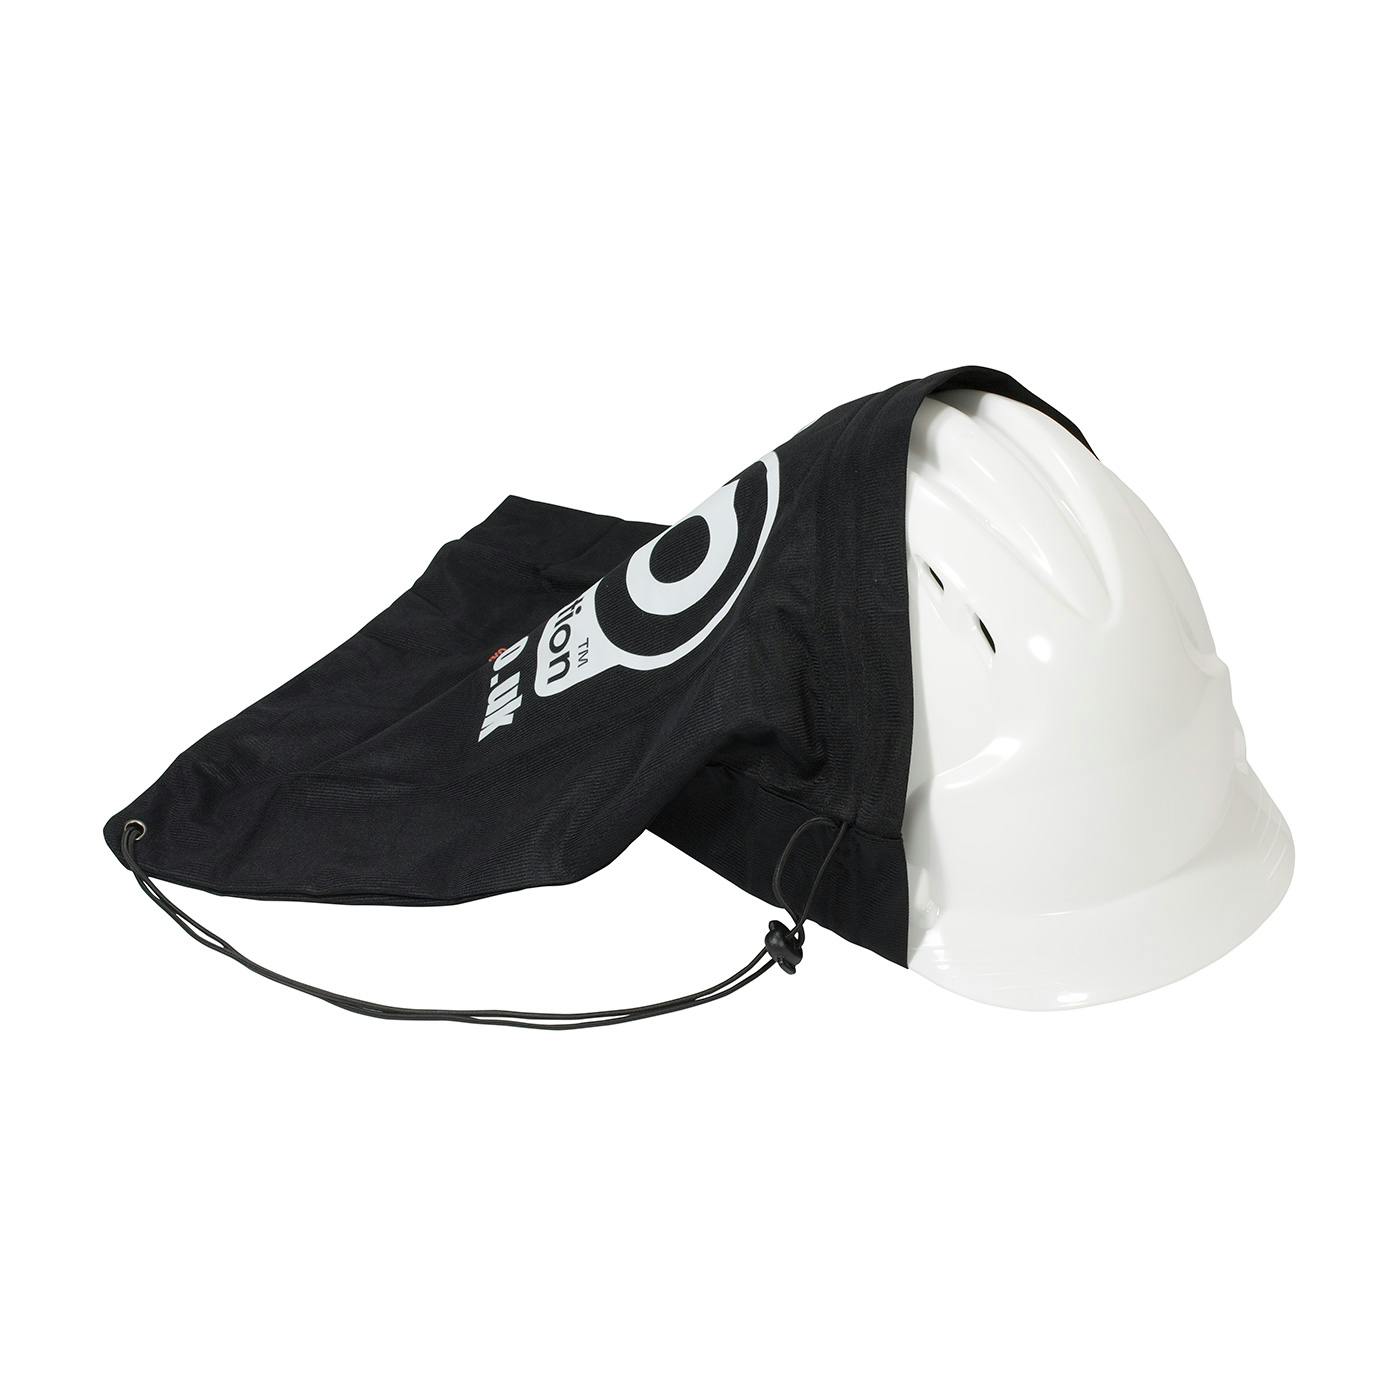 MK8 Evolution® Vented, Type II Linesman Hard Hat with HDPE Shell, EPS Impact Liner, Polyester Suspension, Wheel Ratchet Adjustment and 4-Point Chin Strap (280-AHS240V)_0